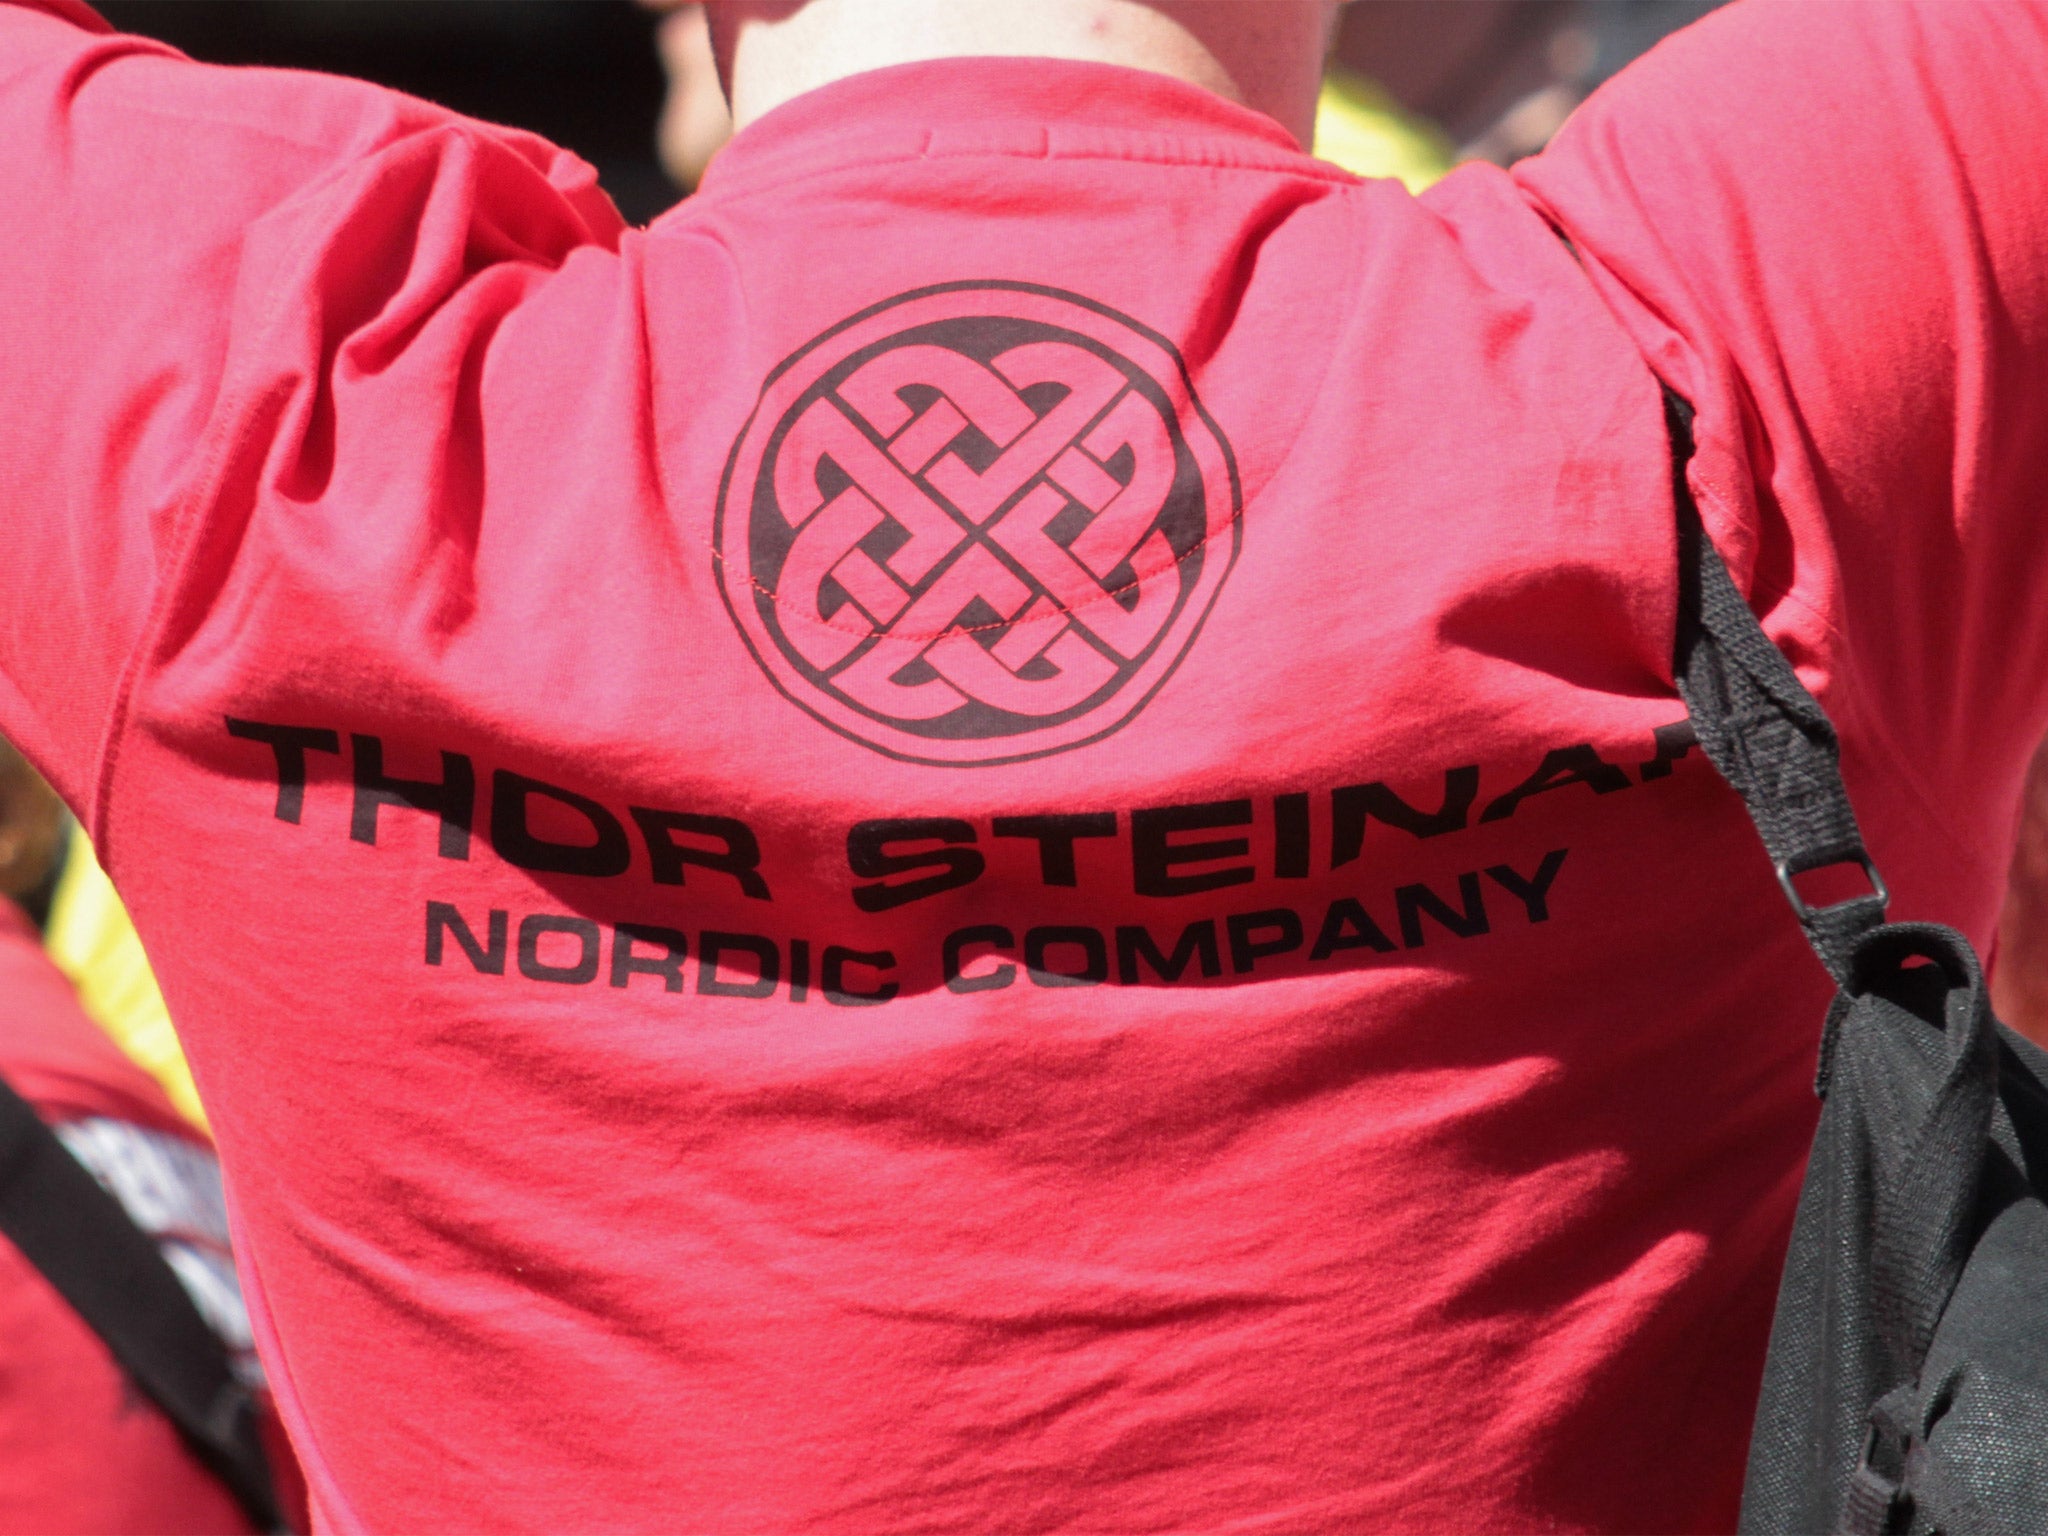 The brand’s T-shirts display runic symbols and Nordic themes popular with neo-Nazis